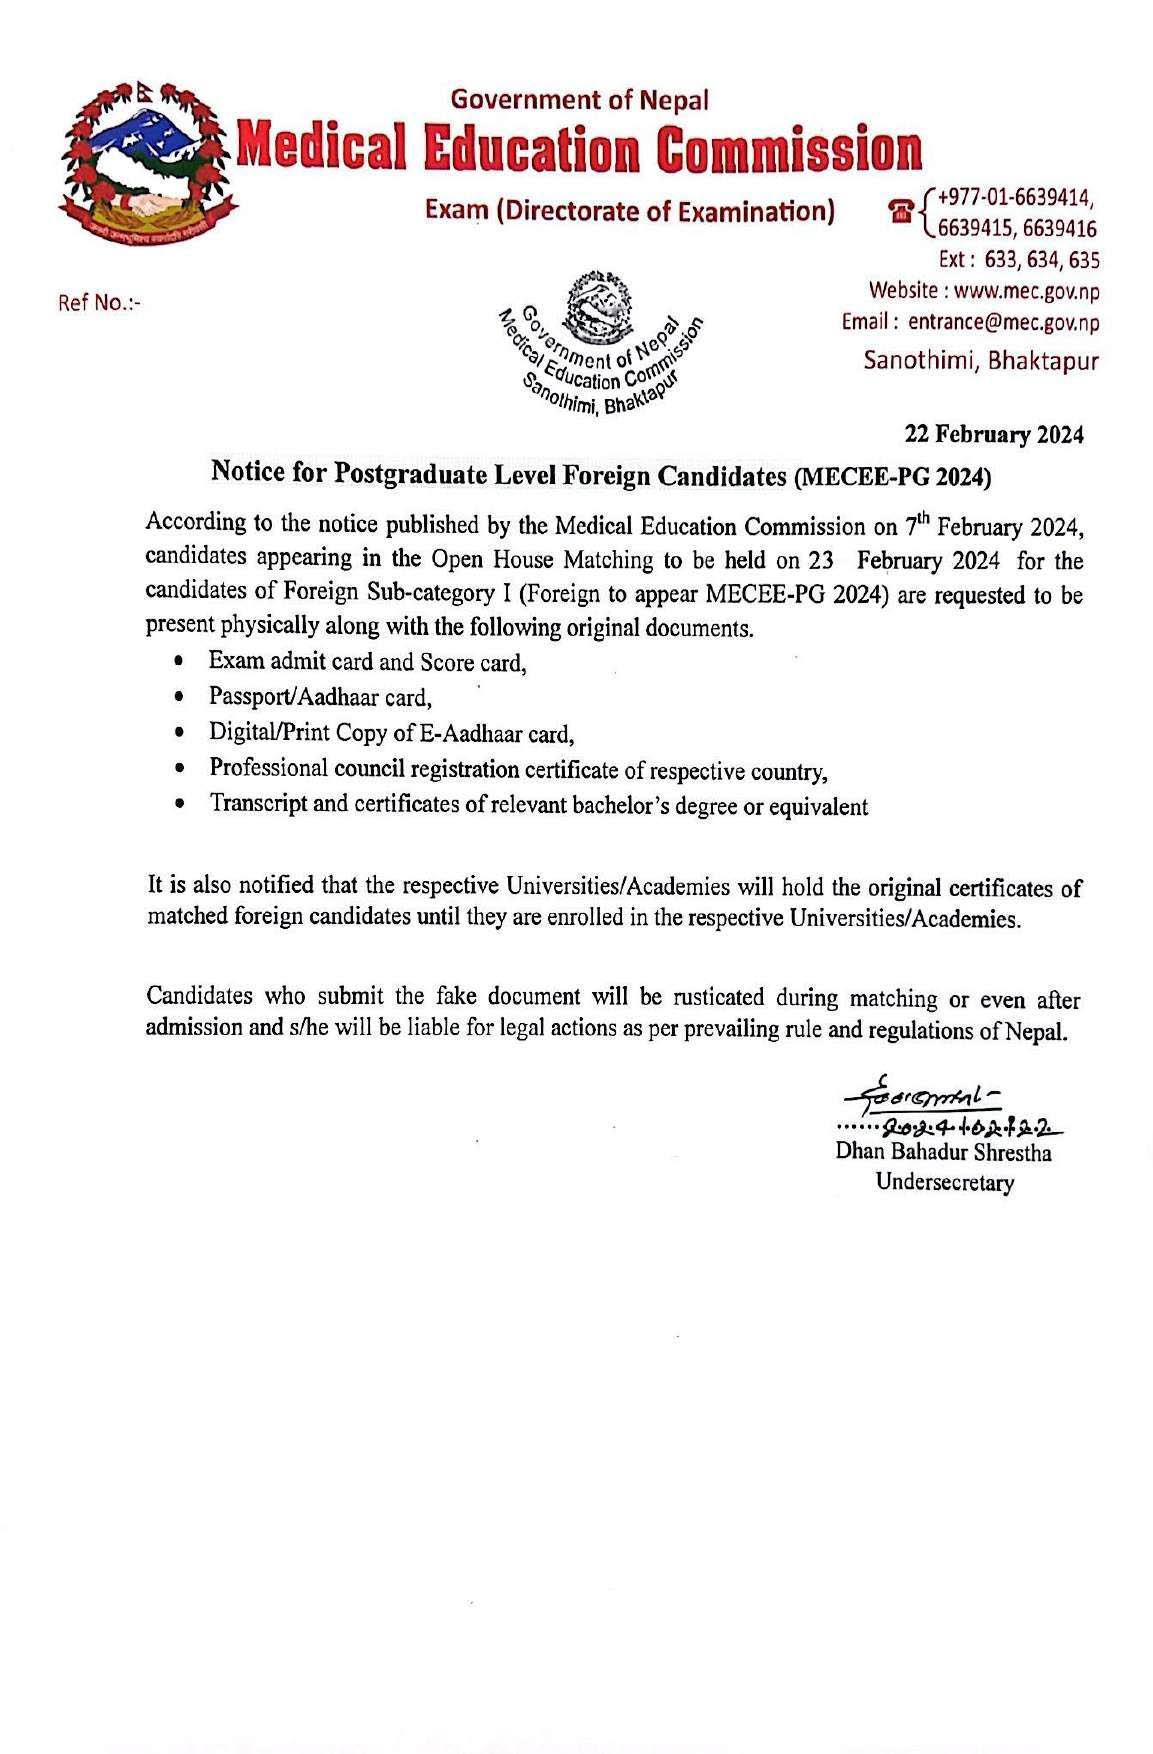 Notice for Postgraduate Level Foreign Candidates (MECEE-PG 2024)